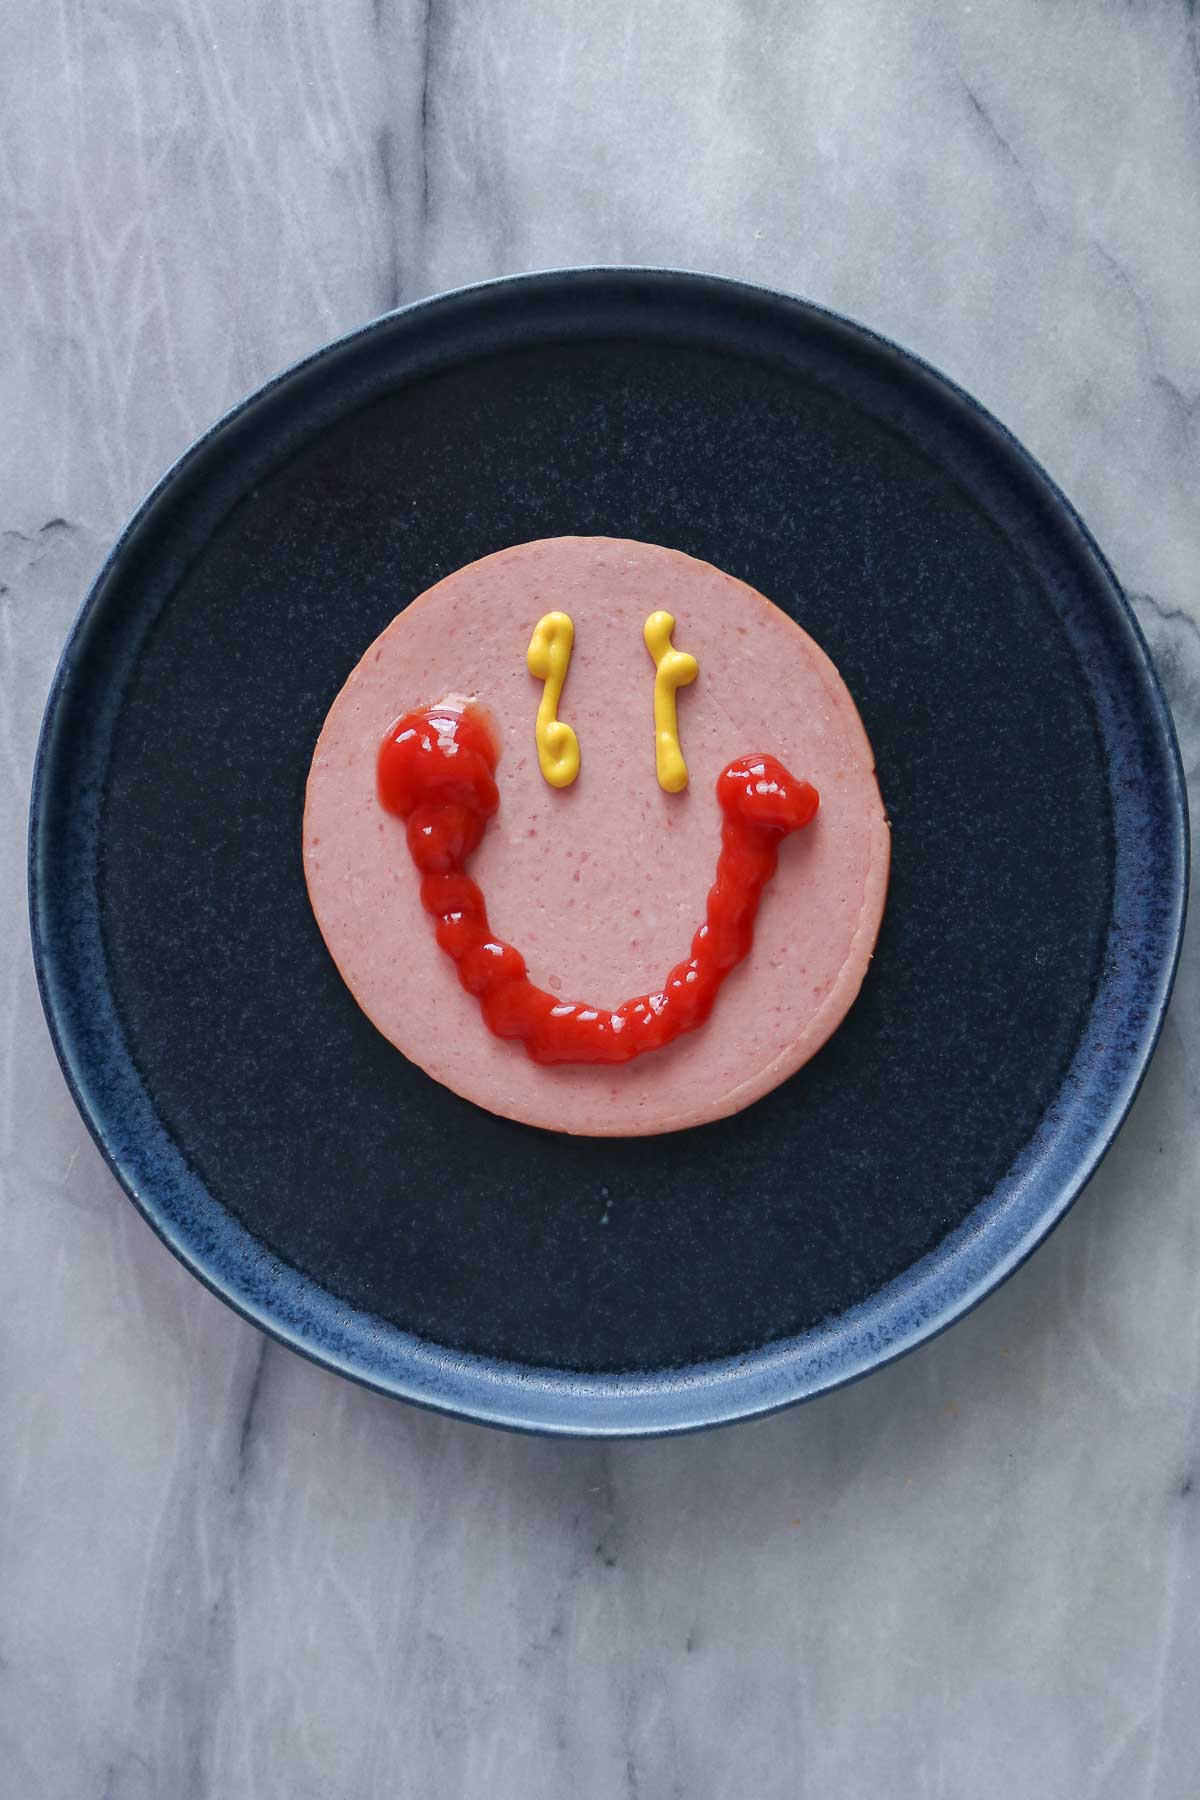 Slice of bologna on a blue plate with a face drawn on it with mustard and ketchup.